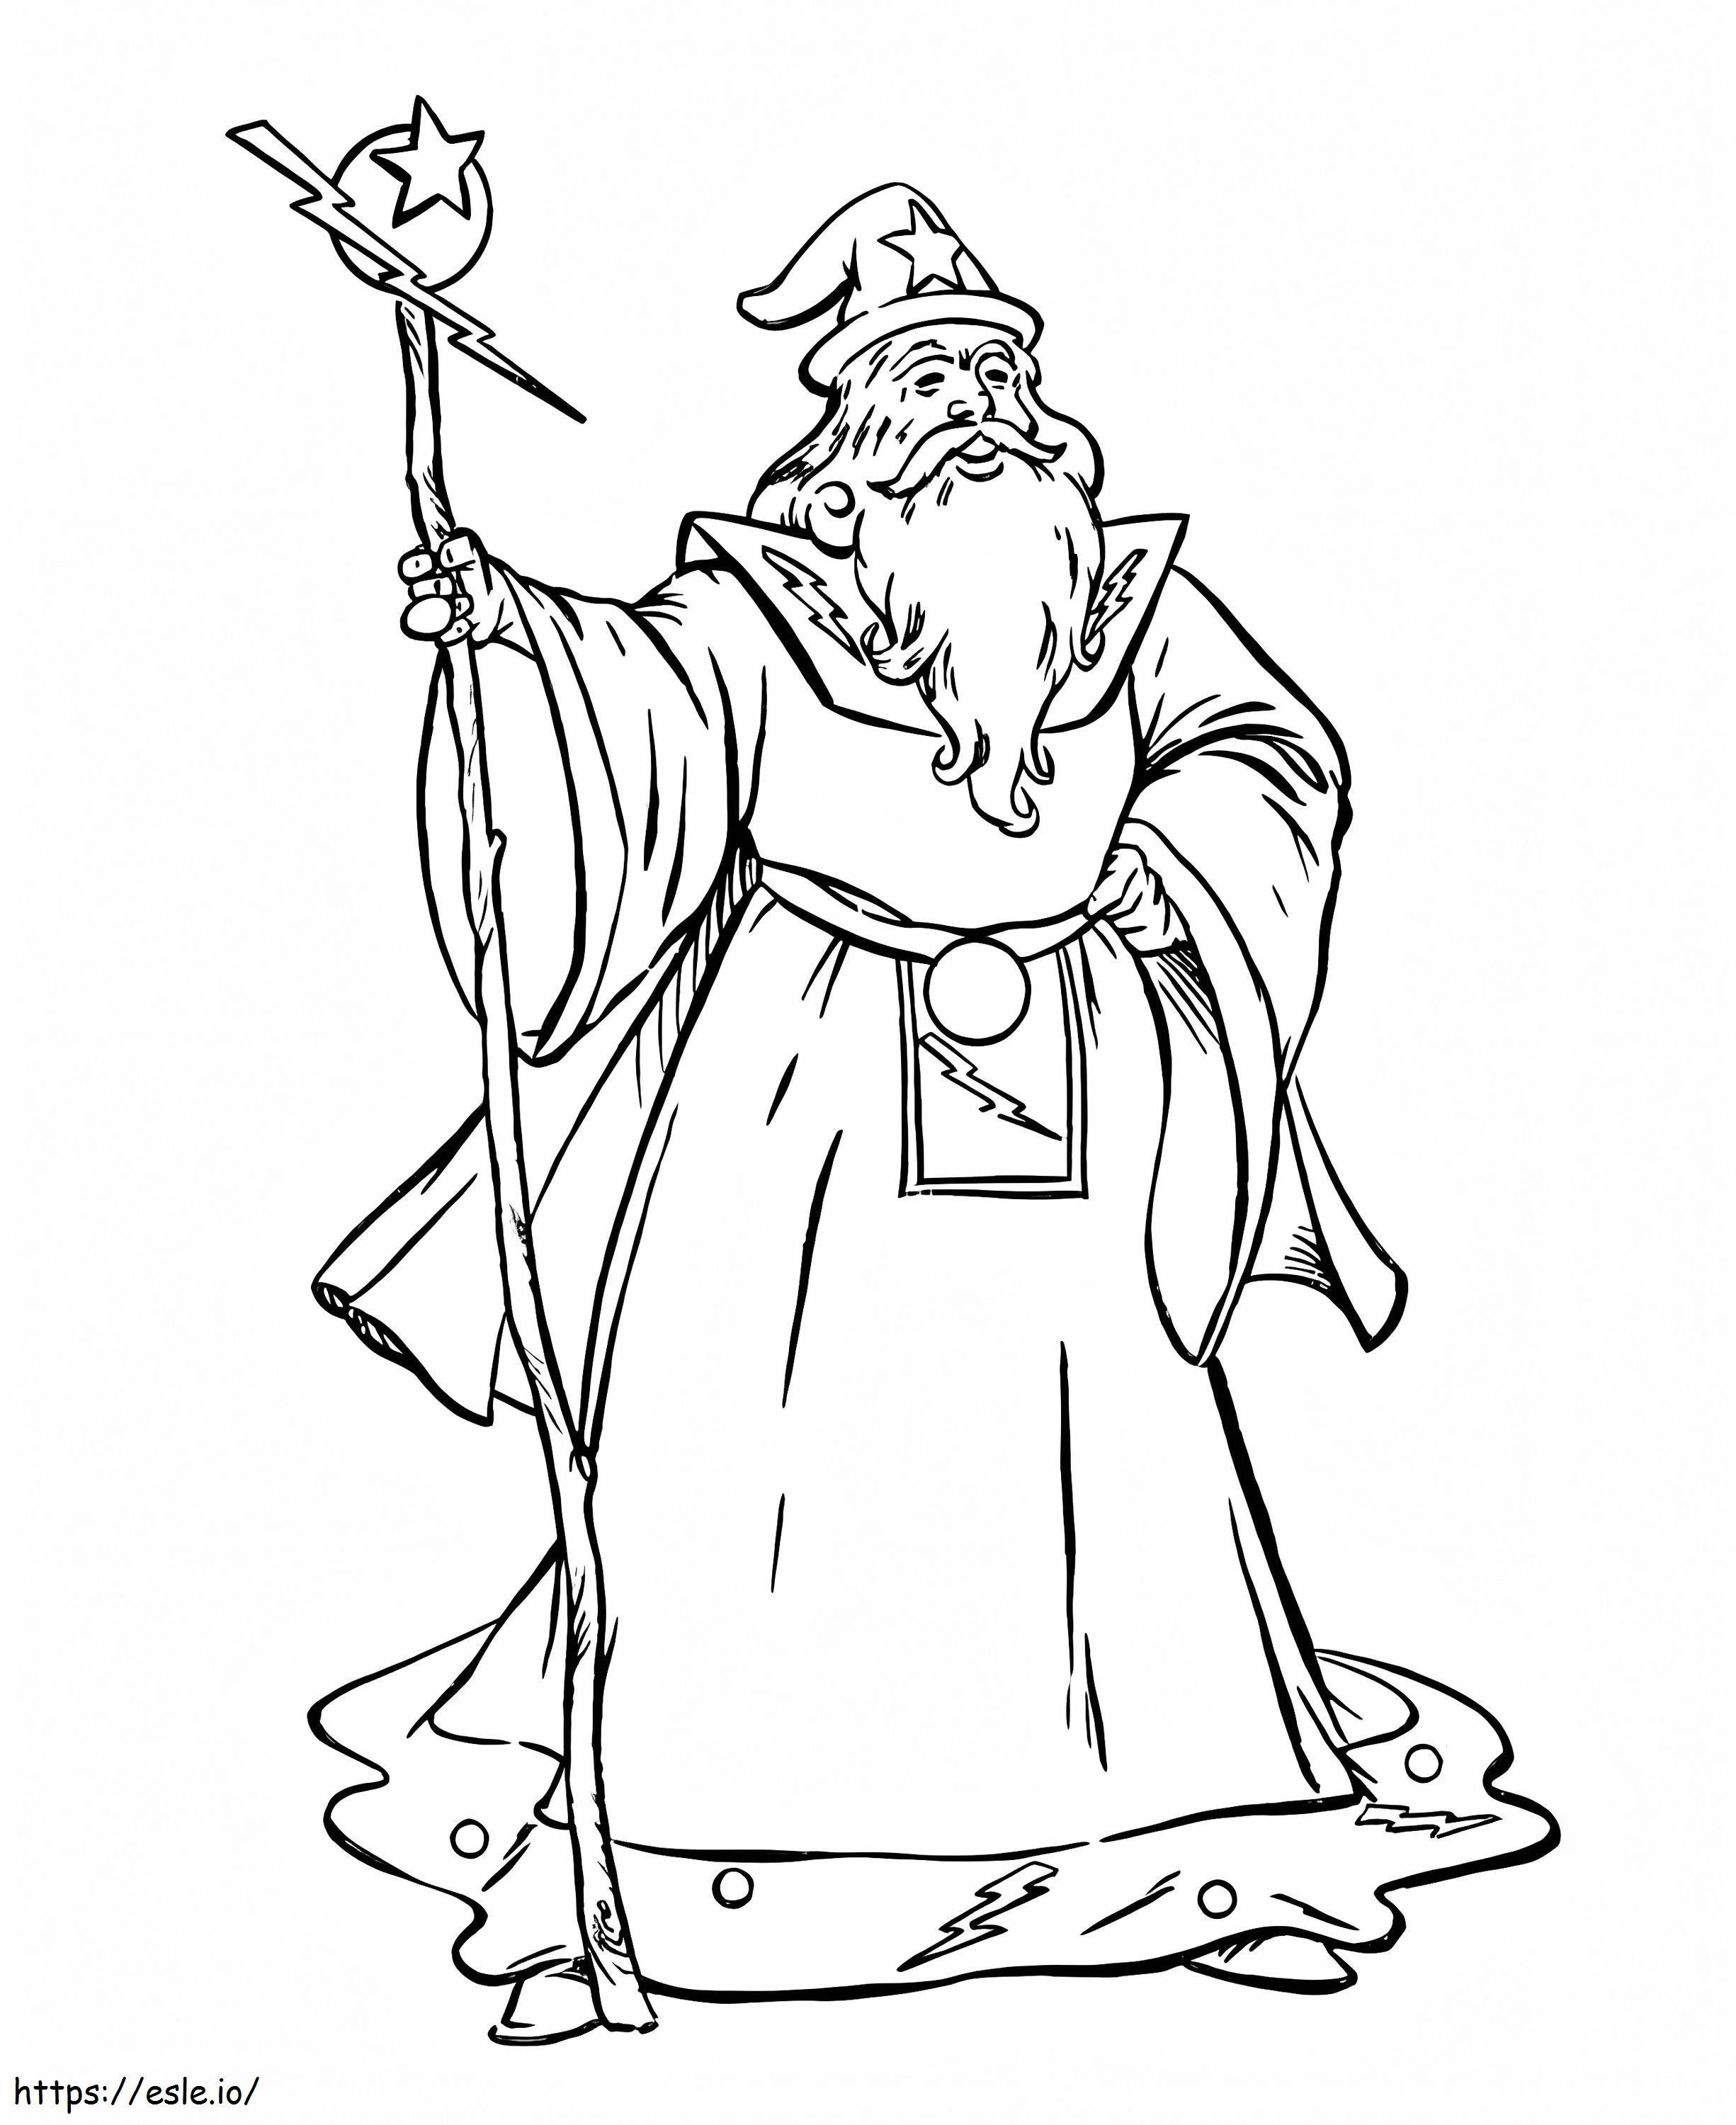 Old Wizard Smiling coloring page